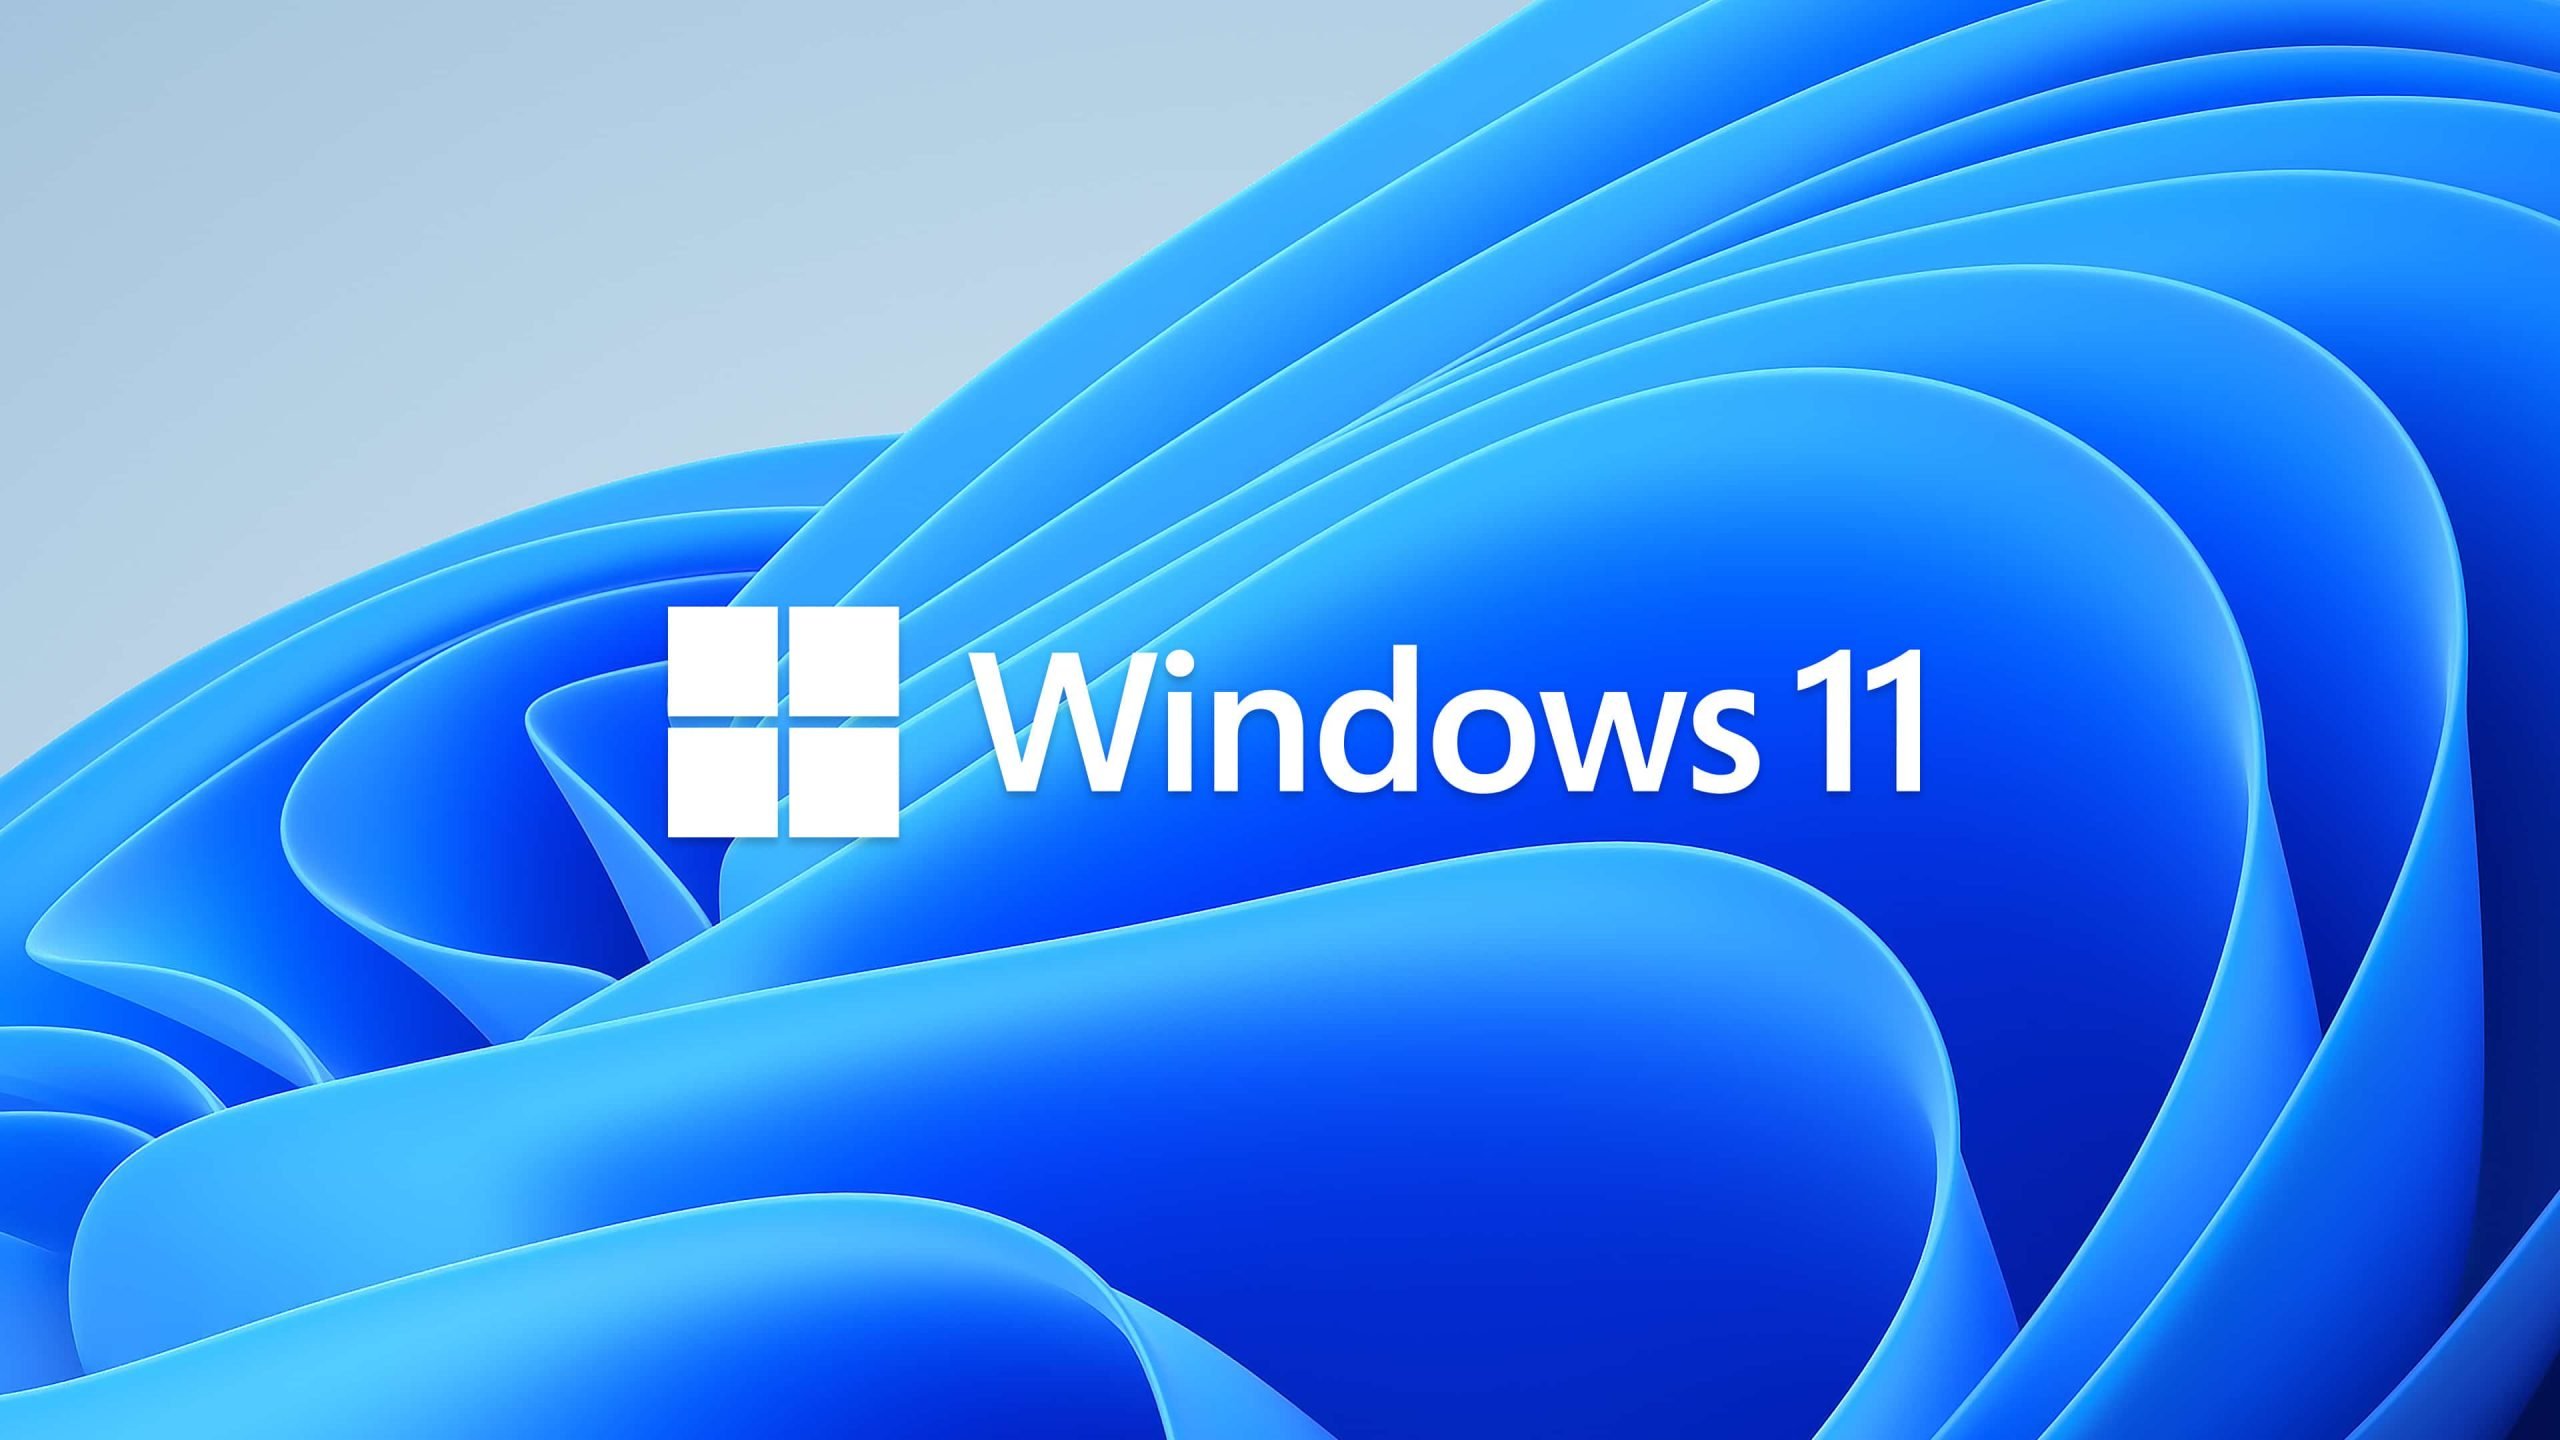 How To Upgrade Windows 10 To Windows 11 For Free